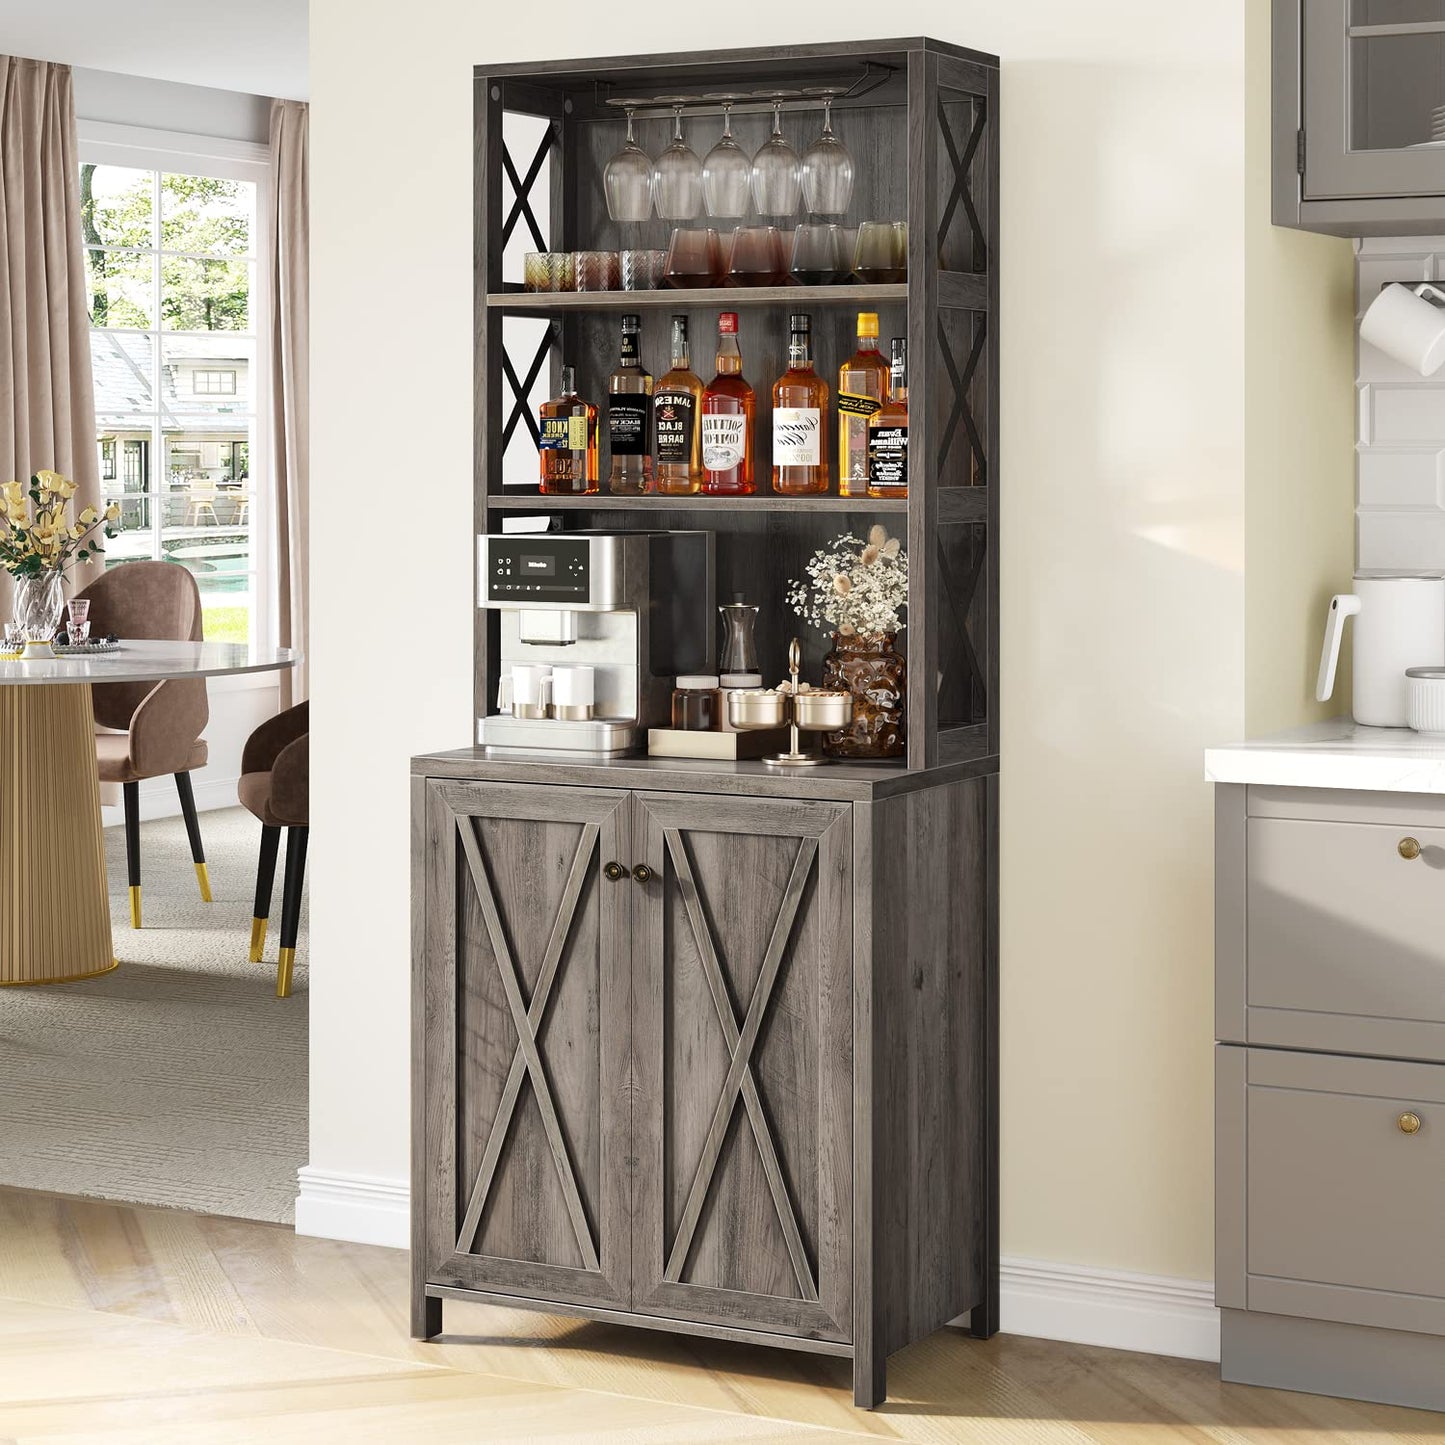 YITAHOME Kitchen Pantry Cabinet Storage Hutch with Microwave Stand Wine Rack, Freestanding Pantry Cabinet with Adjustable Shelves and Cupboard for Home, Rustic Grey Wash